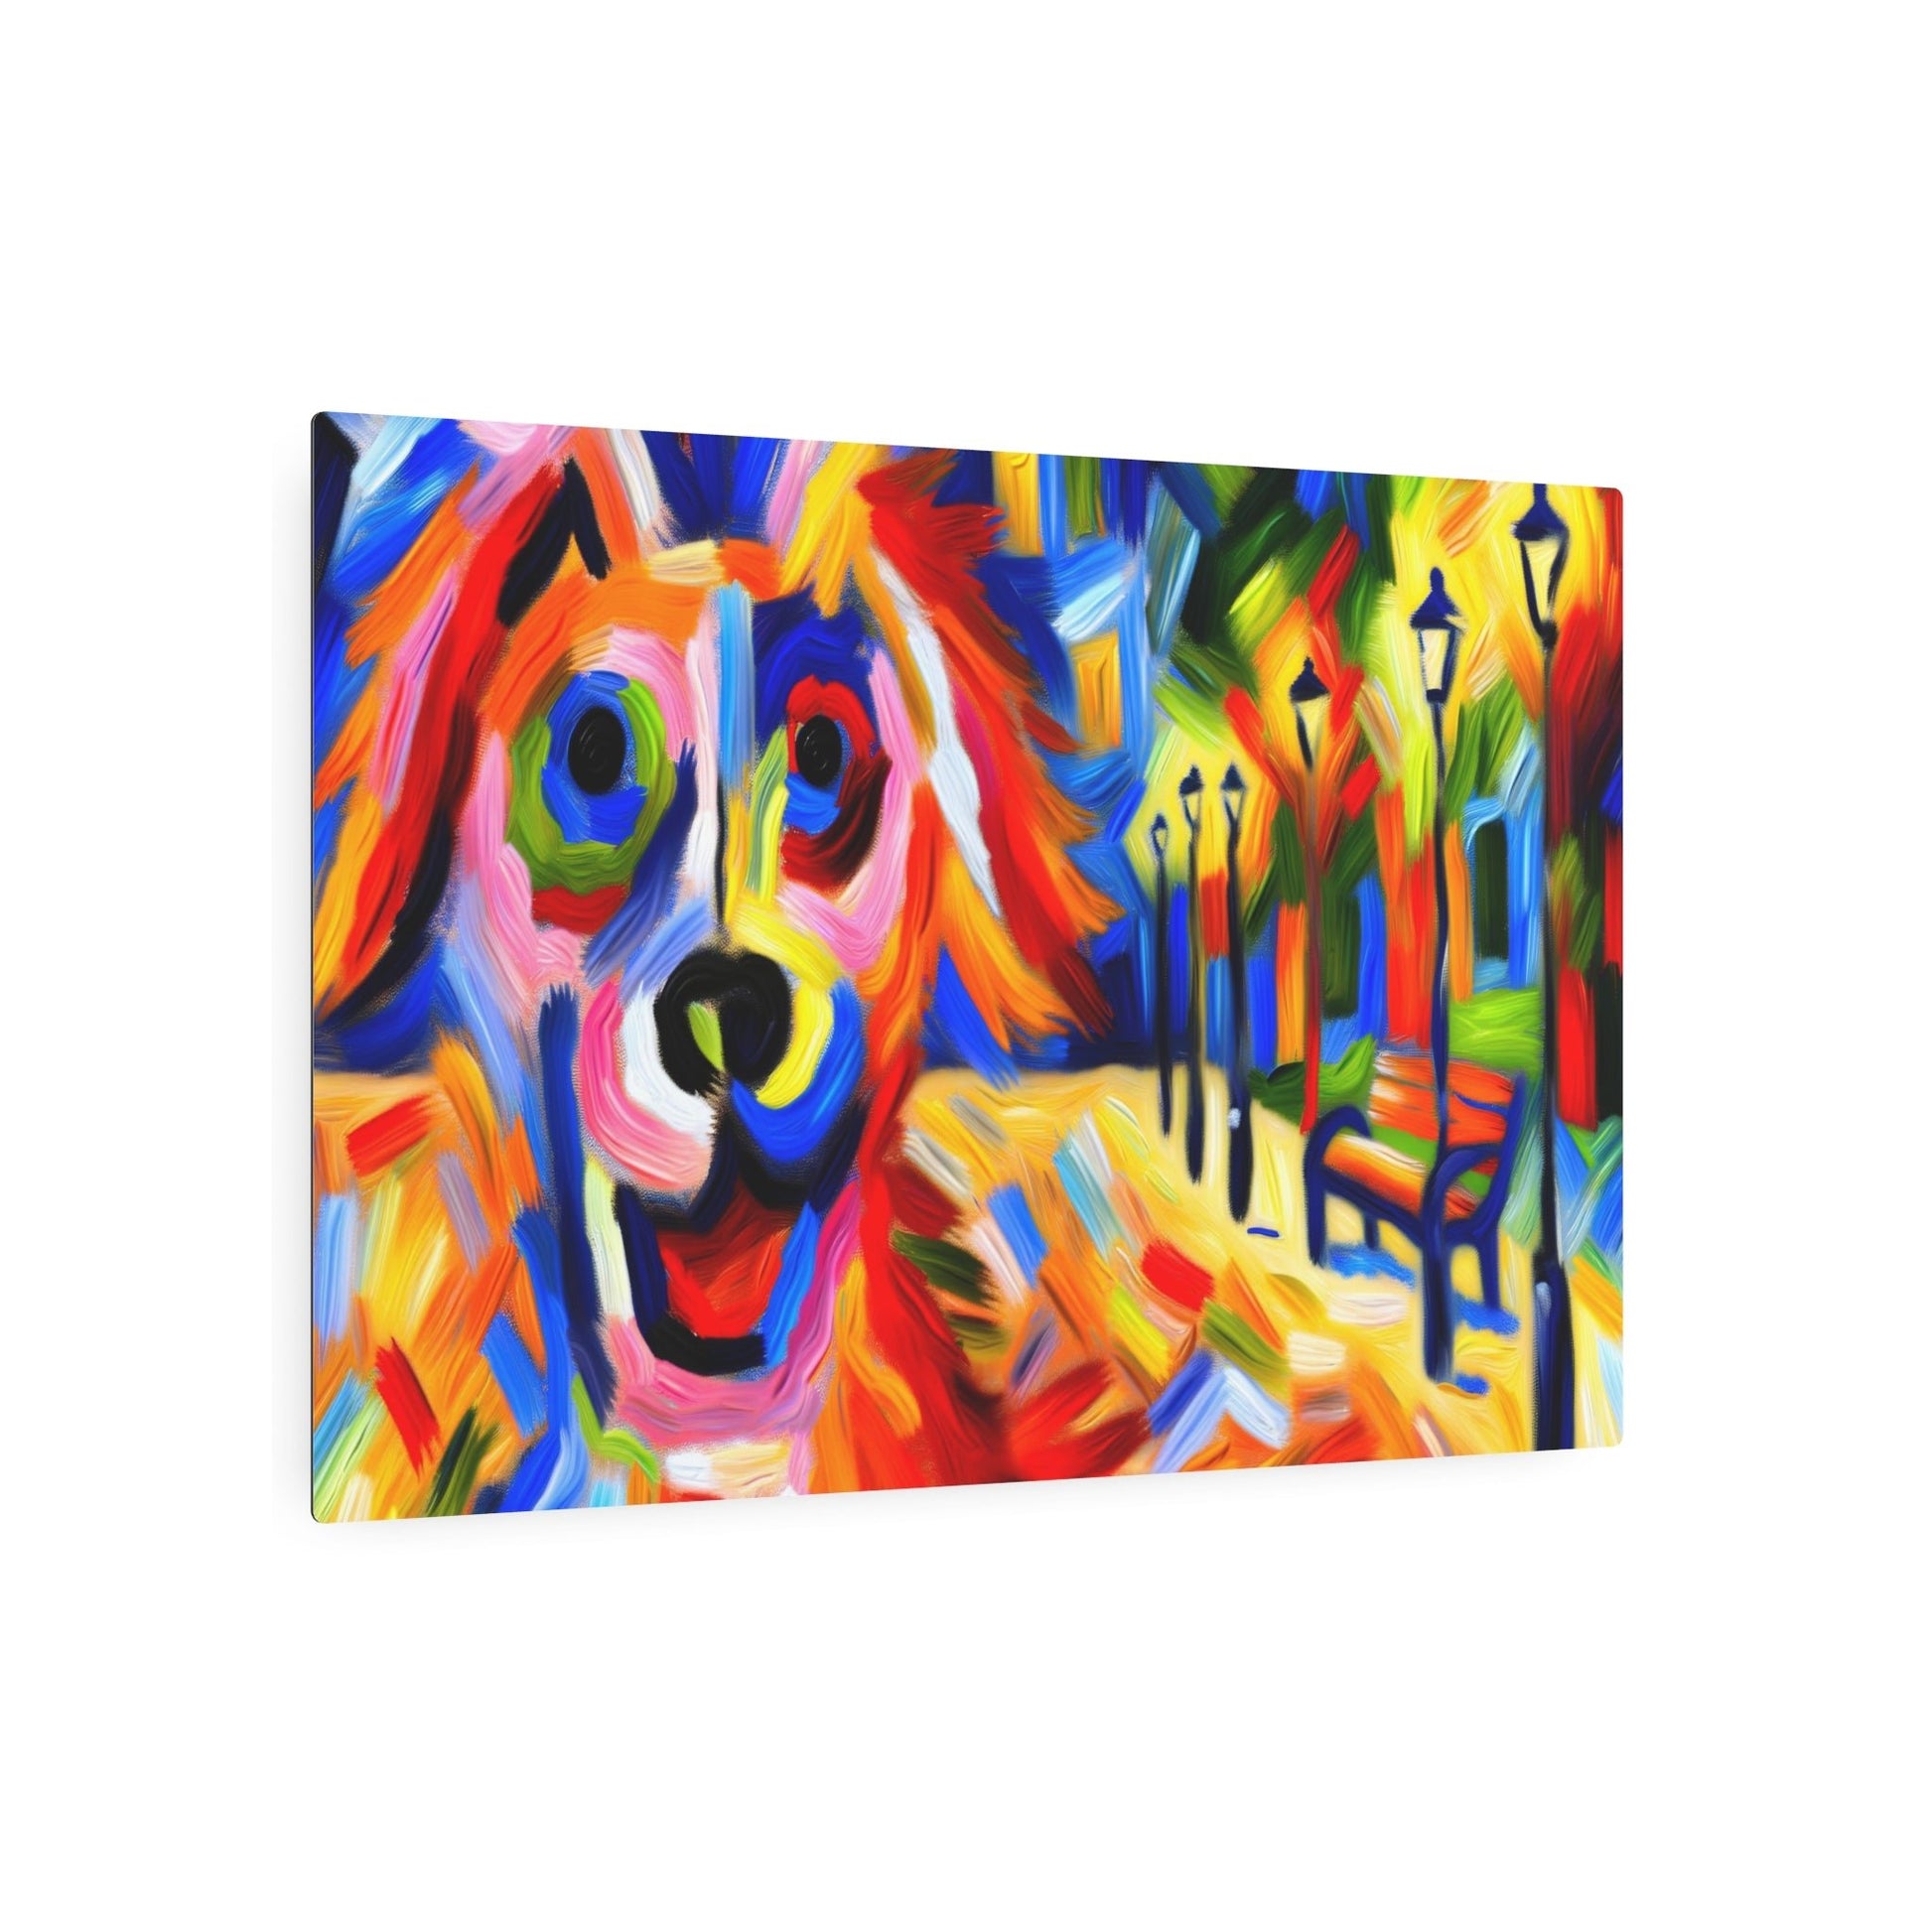 Metal Poster Art | "Vibrant Expressionism Style Oil Painting of a Playful Dog in Bold Colors - Western Art Styles Collection" - Metal Poster Art 36″ x 24″ (Horizontal) 0.12''